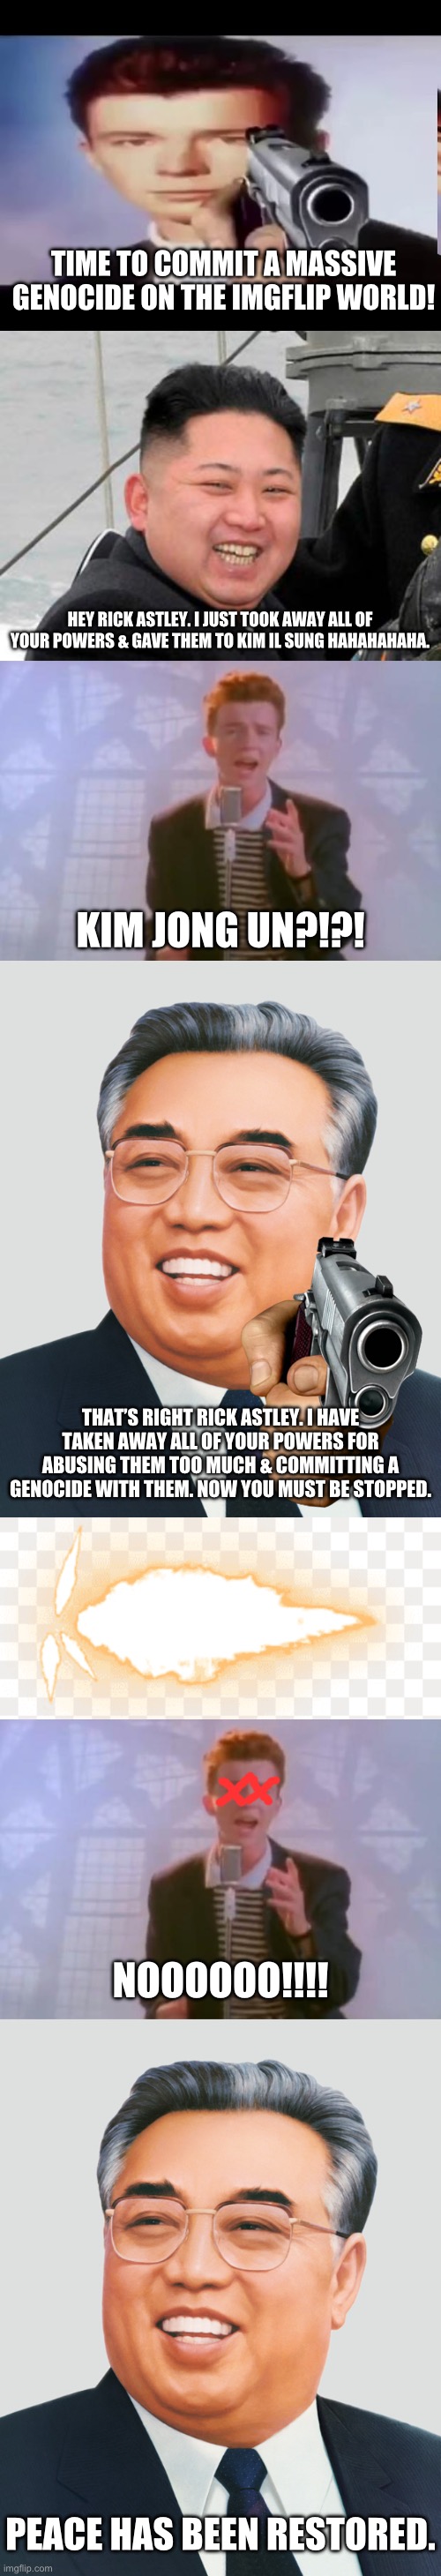 TIME TO COMMIT A MASSIVE GENOCIDE ON THE IMGFLIP WORLD! HEY RICK ASTLEY. I JUST TOOK AWAY ALL OF YOUR POWERS & GAVE THEM TO KIM IL SUNG HAHAHAHAHA. KIM JONG UN?!?! THAT’S RIGHT RICK ASTLEY. I HAVE TAKEN AWAY ALL OF YOUR POWERS FOR ABUSING THEM TOO MUCH & COMMITTING A GENOCIDE WITH THEM. NOW YOU MUST BE STOPPED. NOOOOOO!!!! PEACE HAS BEEN RESTORED. | image tagged in rick with gun,happy kim jong un,rick astley,kim il sung,gunshot | made w/ Imgflip meme maker